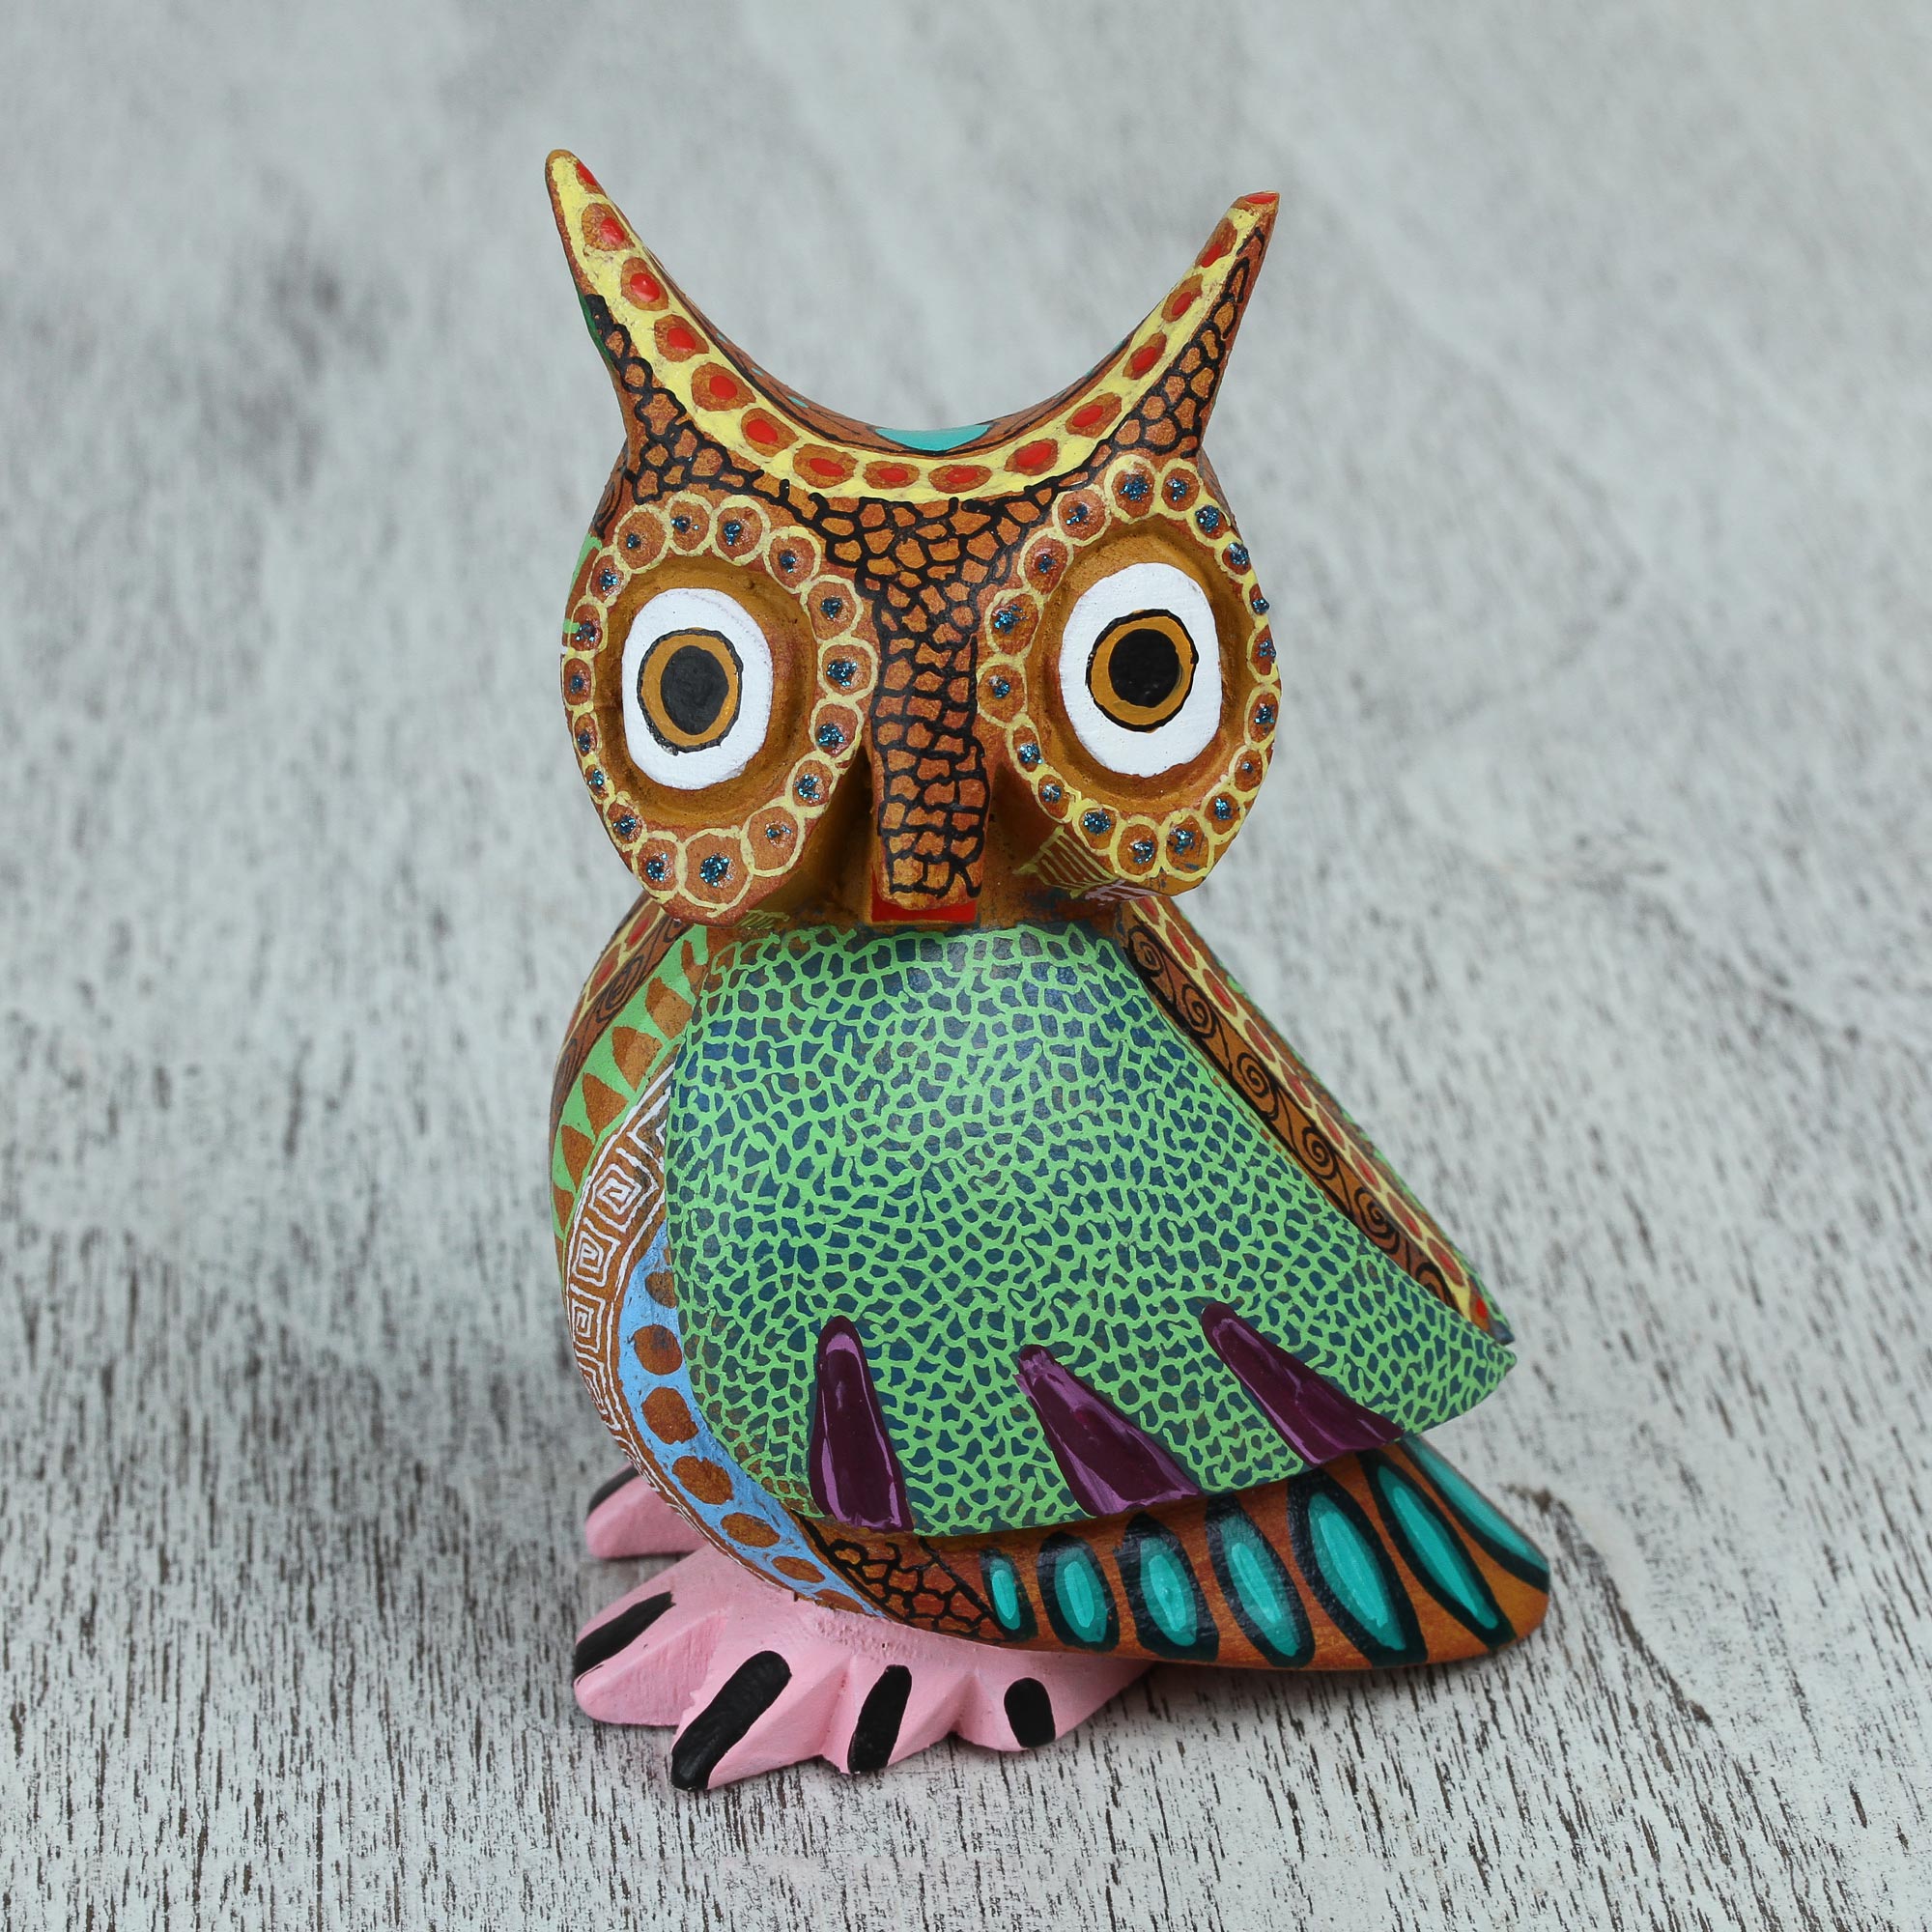 NOVICA Dream Vision Hand-Carved Copal Wood Owl Alebrije Sculpture From Mexico